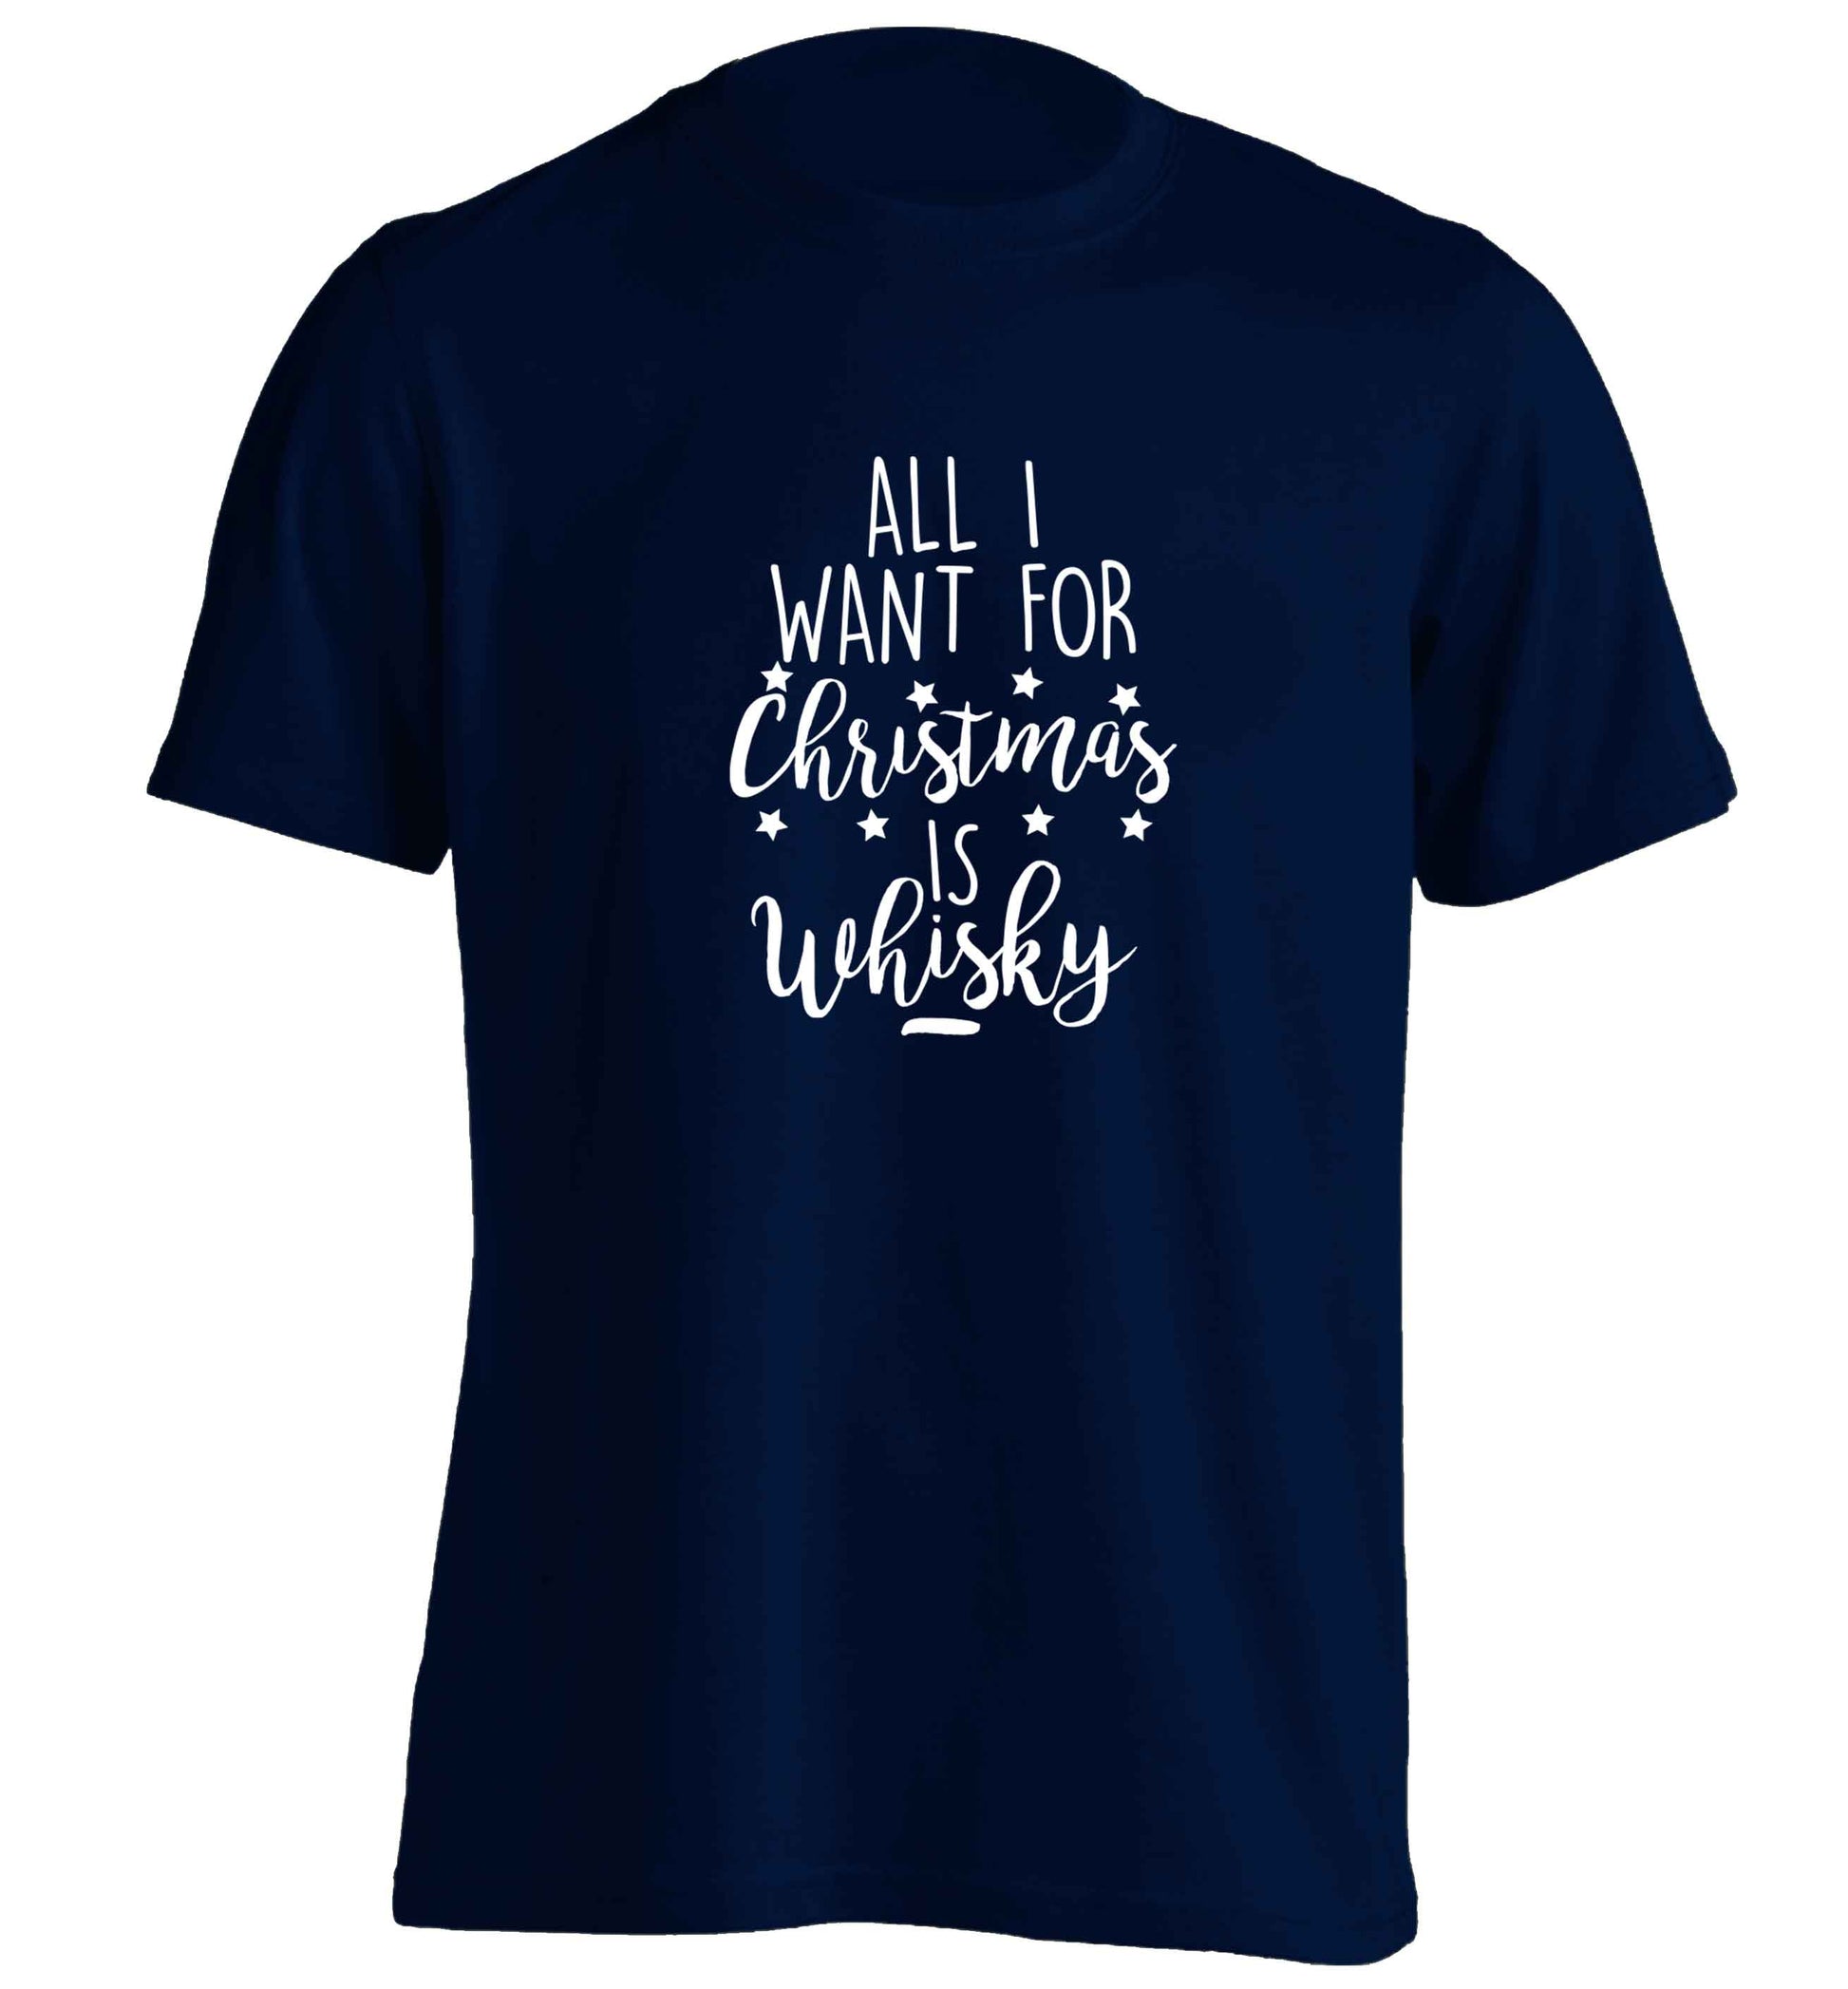 All I want for Christmas is whisky adults unisex navy Tshirt 2XL